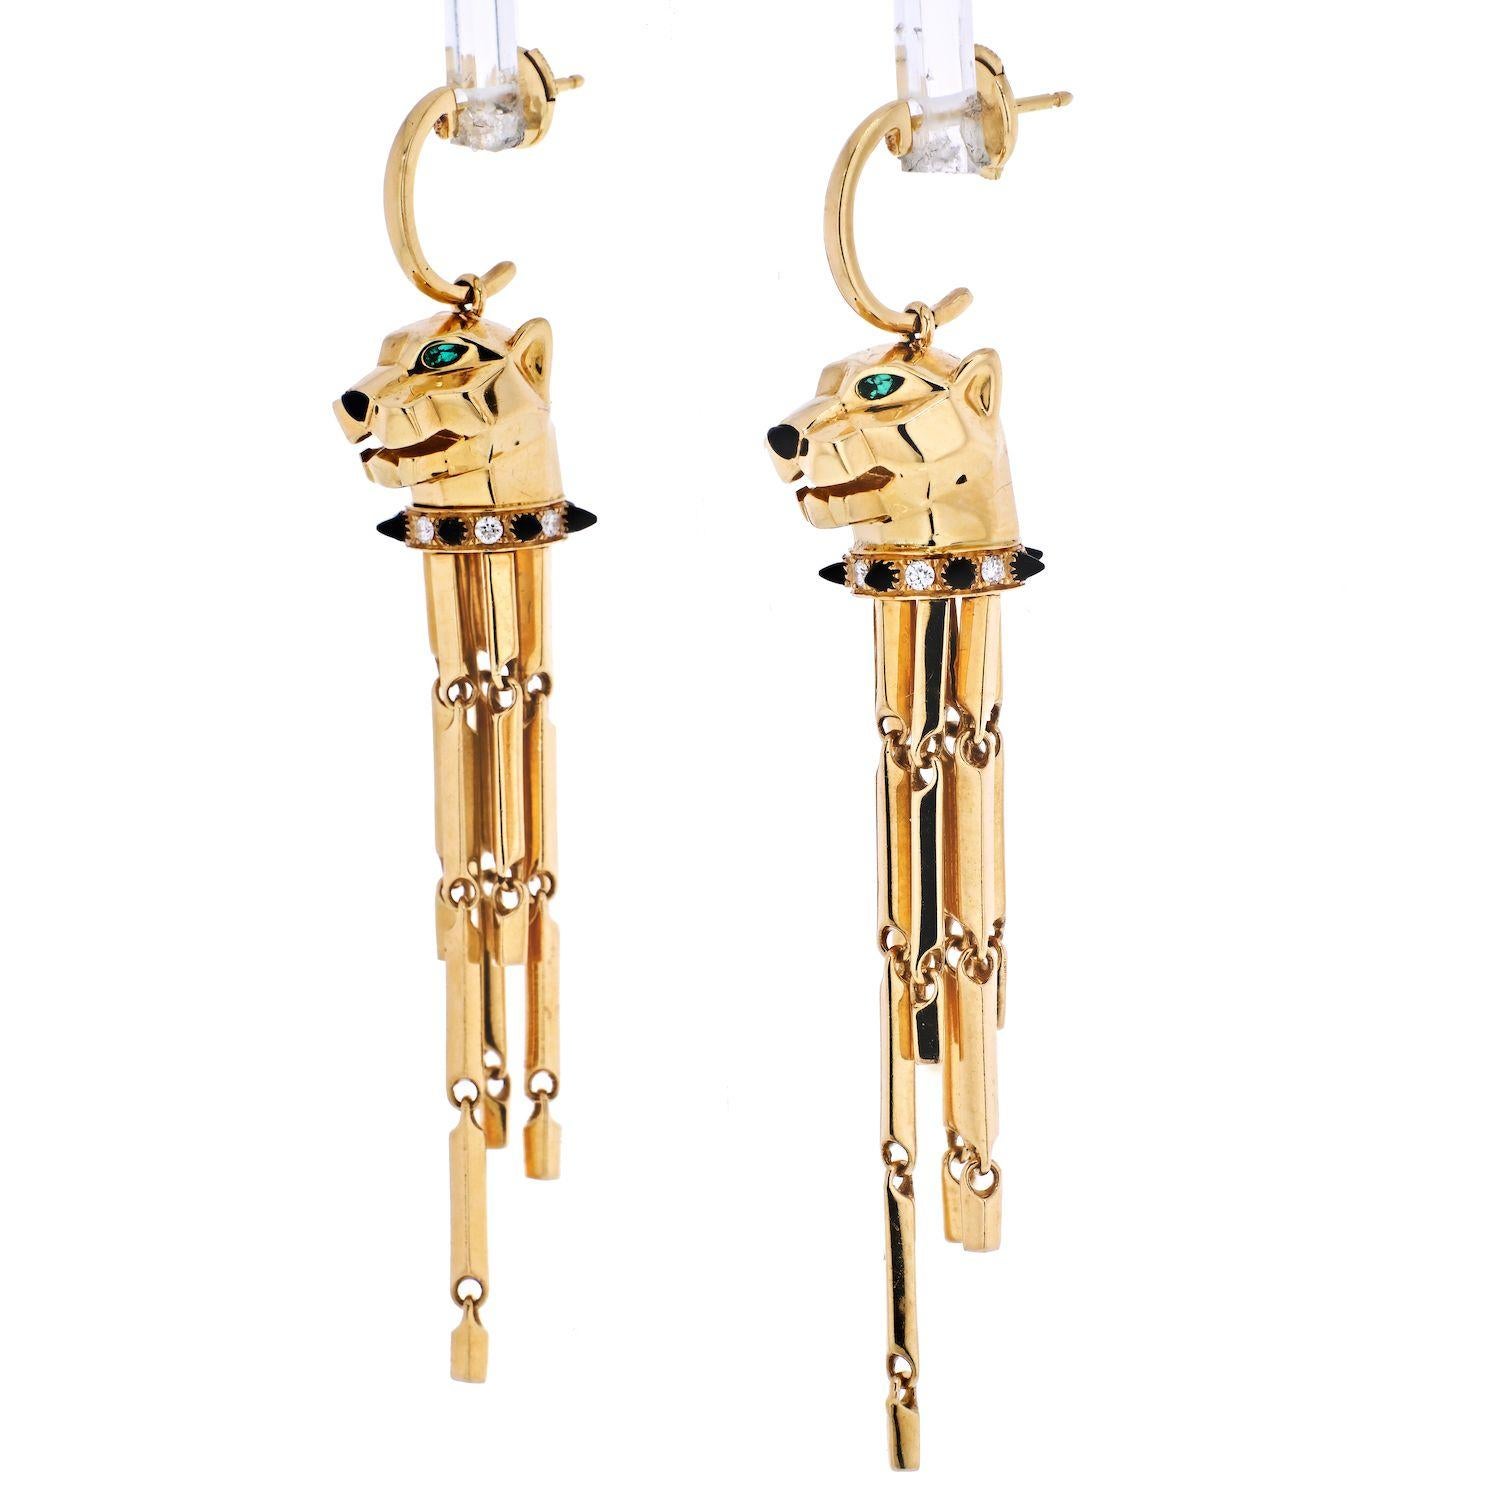 A spectacular pair of 18k yellow gold Cartier earrings from the Panthere de Cartier collection. The earrings comprise of a Panthere's head, with tsavorite set to the eyes and black onyx to the nose. The Panthere has round brilliant cut diamonds and